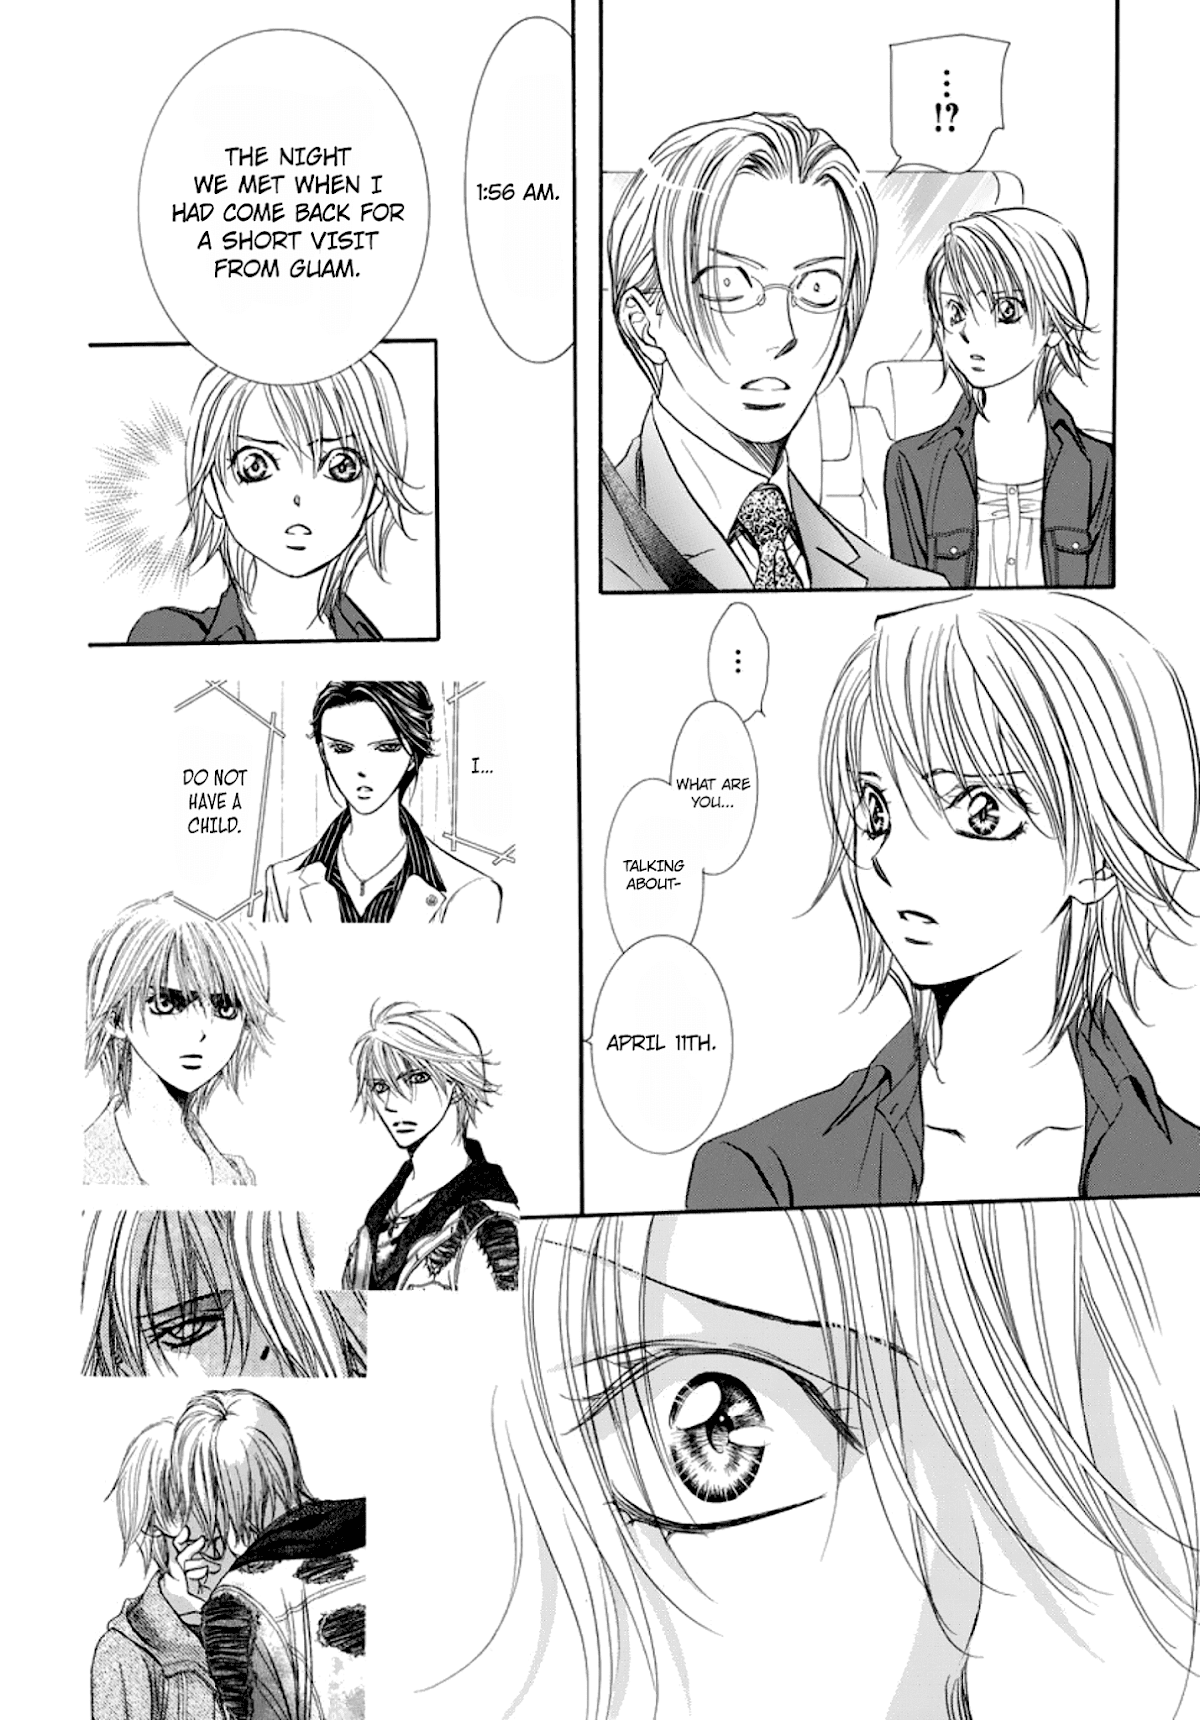 Skip Beat!, Chapter 267 Unexpected Results - The Day Before - image 13